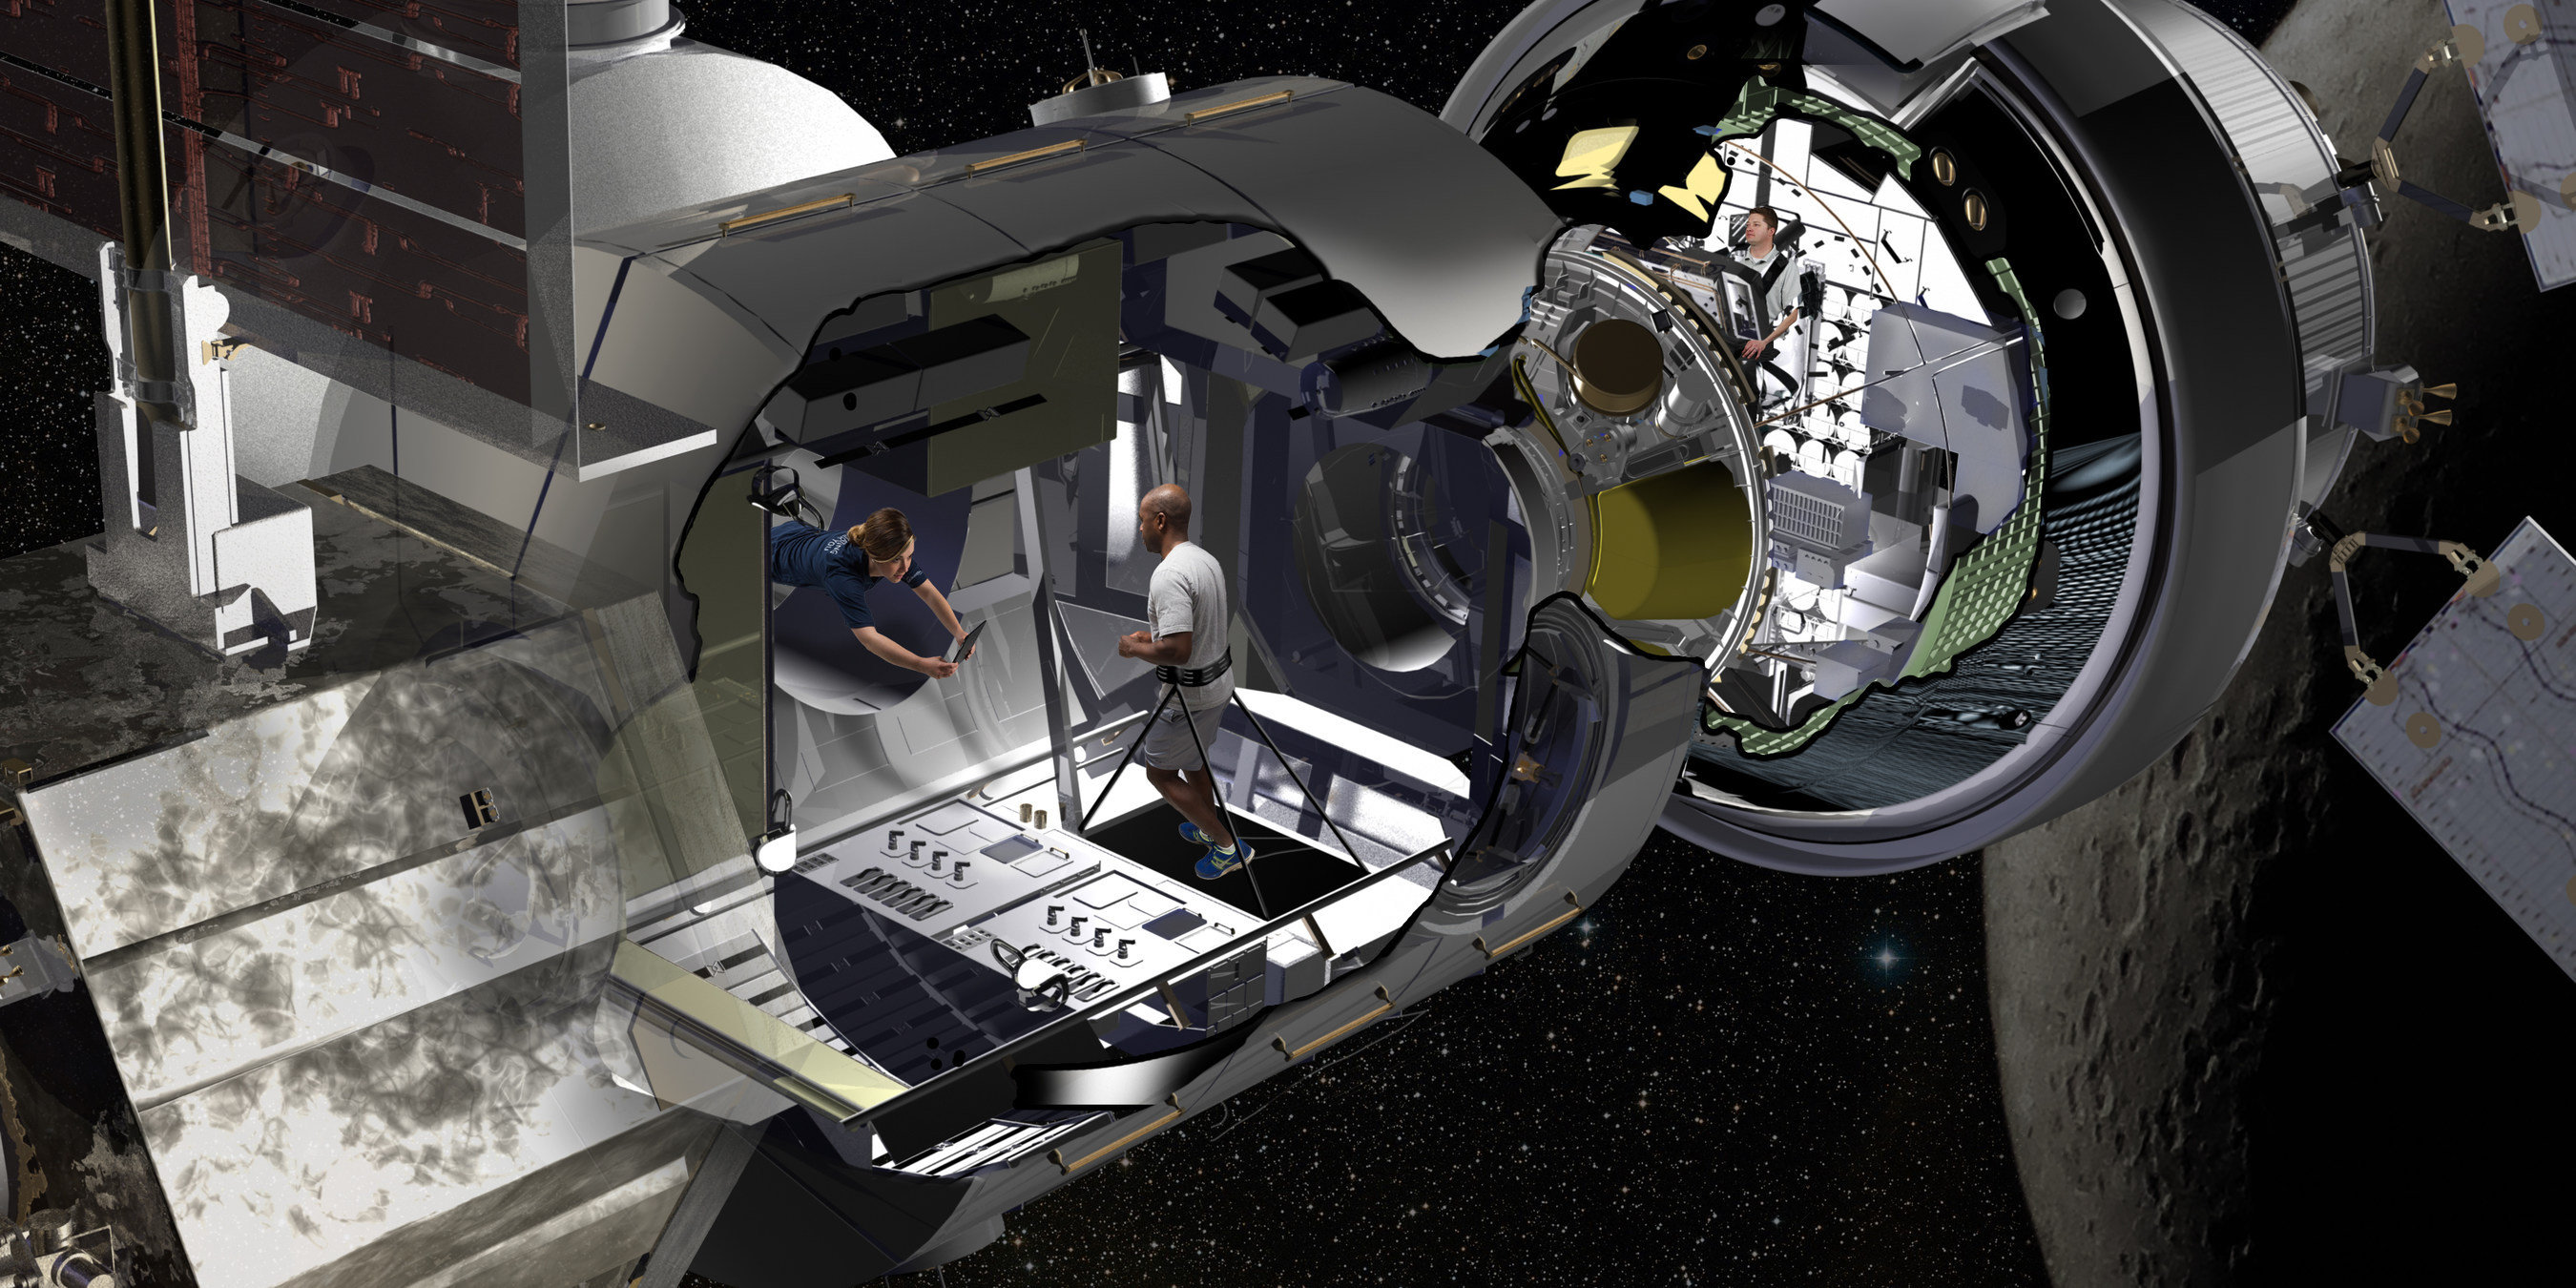 Lockheed Martin showed where the astronauts will live during missions into deep space